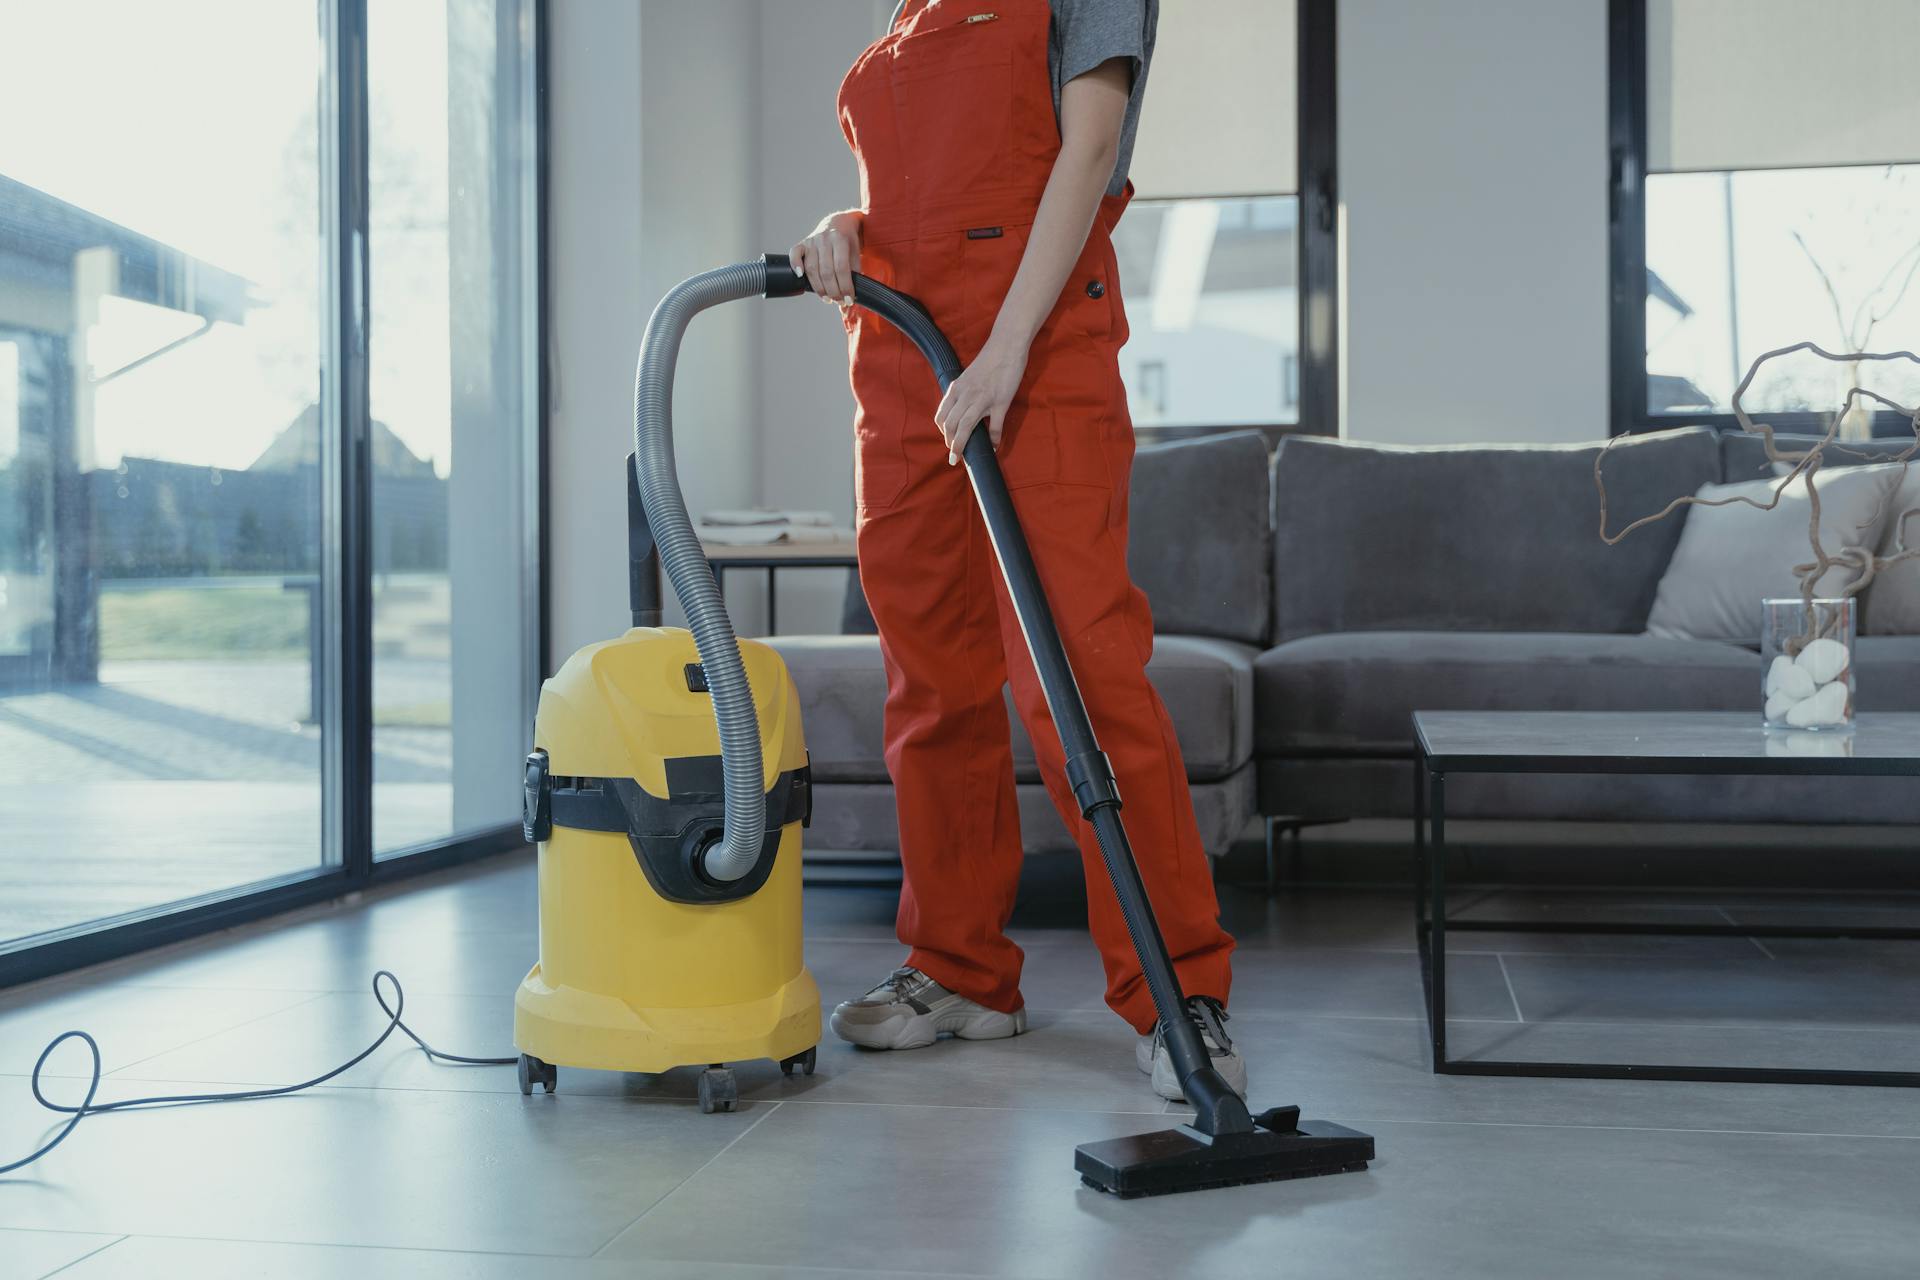 A woman cleaning an office | Source: Pexels